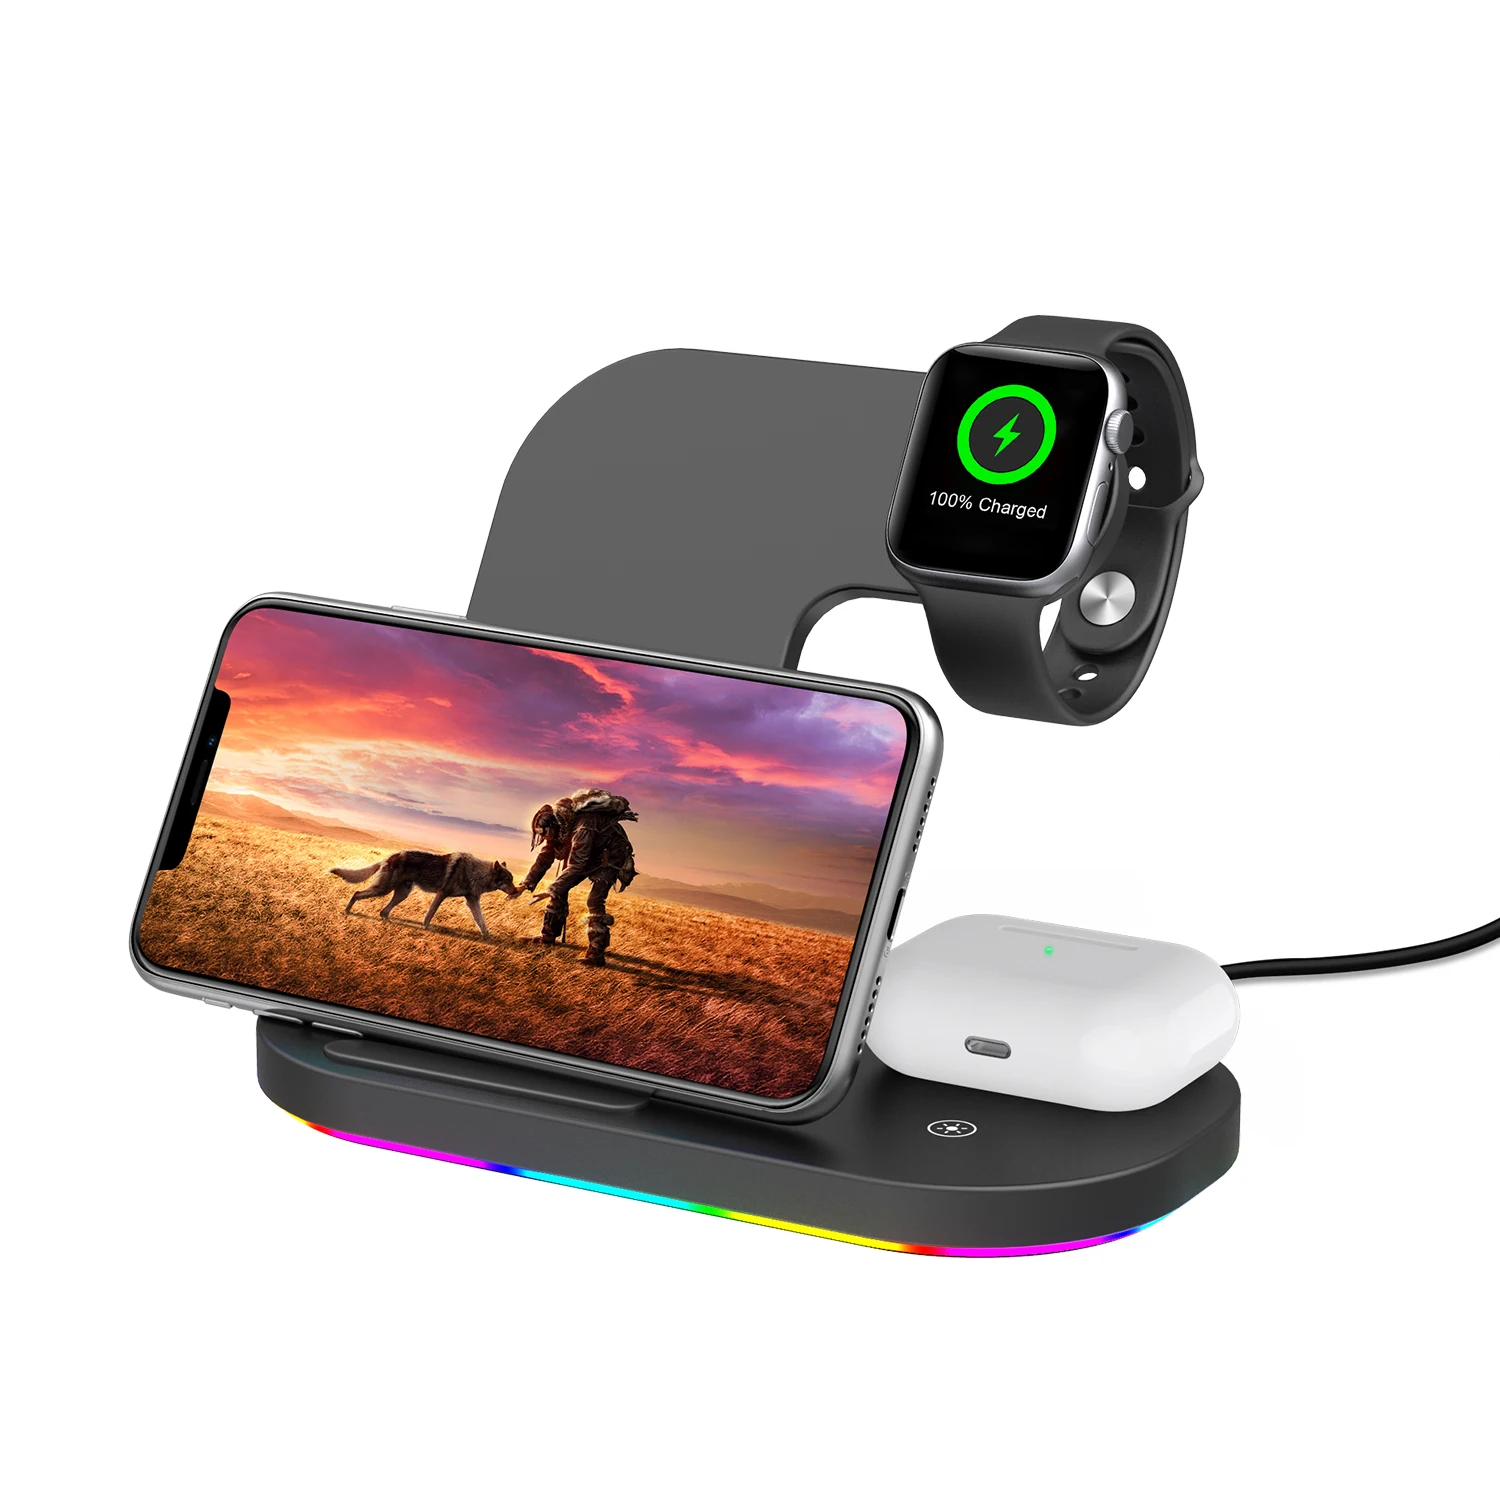 

Multi Mobile Fast Usb 3 In 1 Dock Stand Station Qi Wireless Charger with Holder for Iphone 11 Pro Max IPhone Airpod Iwatch